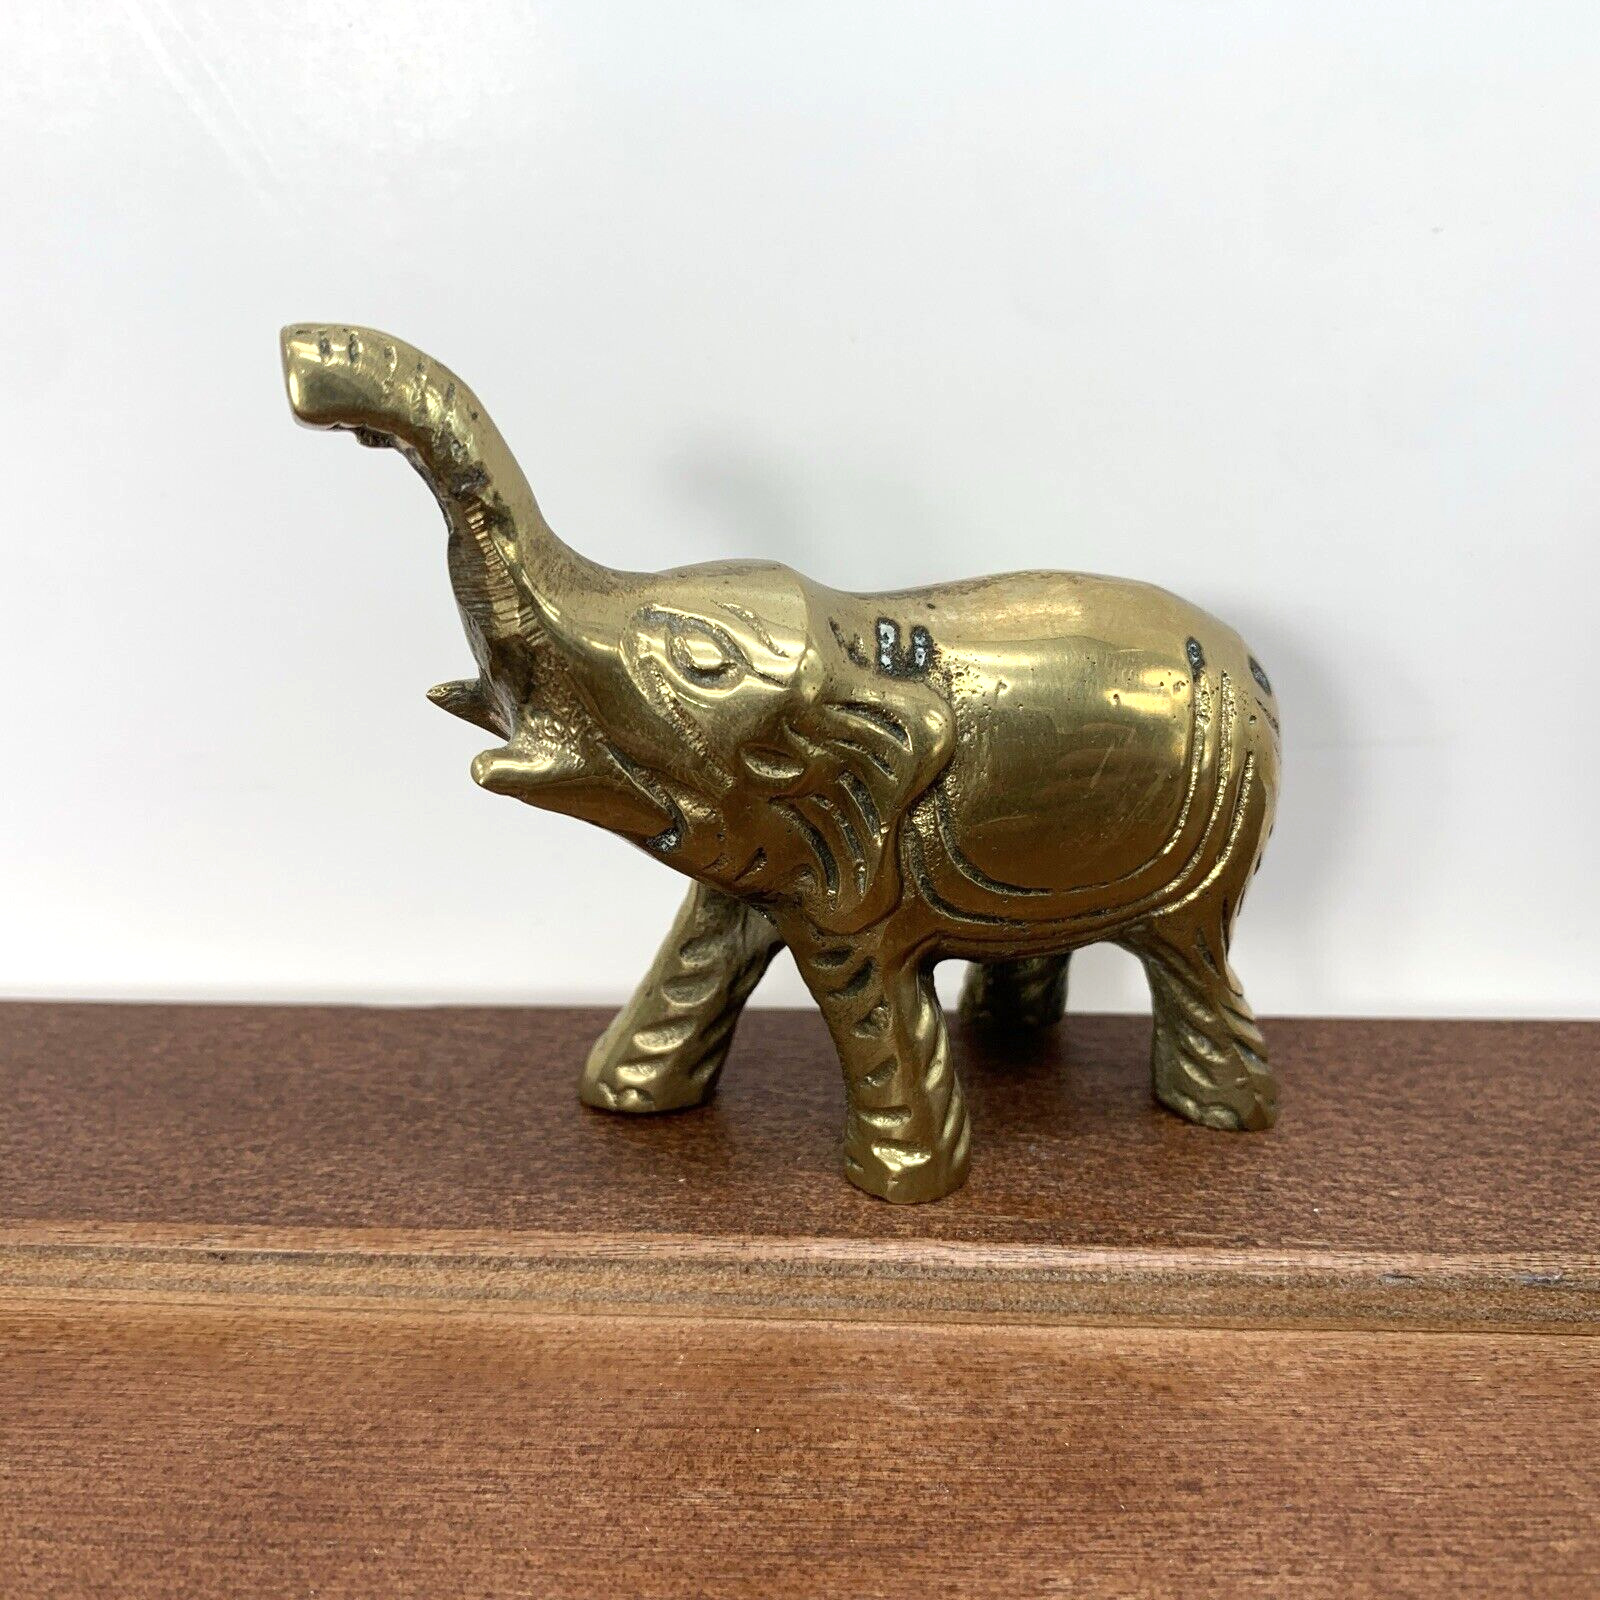 Vintage Solid Brass Metal Gold Tone Small Elephant Paperweight Figurine